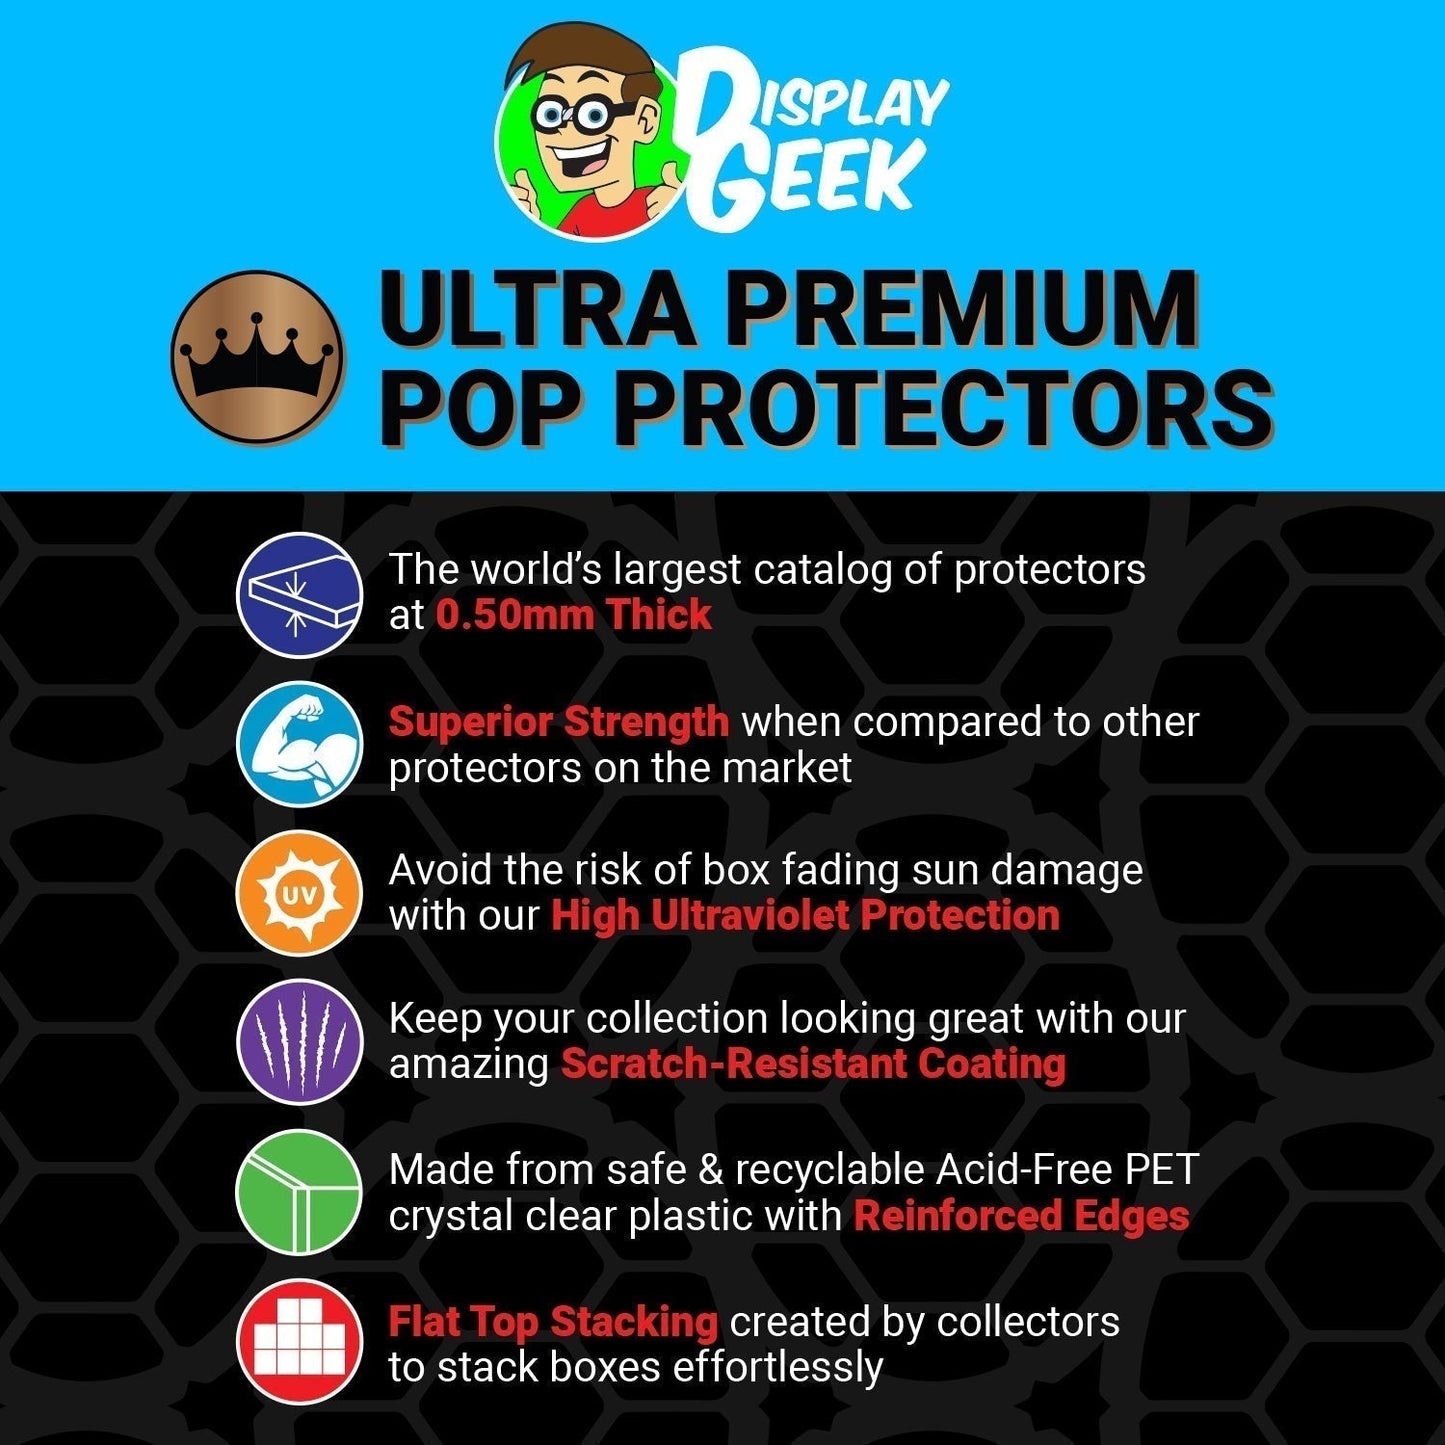 Pop Protector for 10 inch Kyojuro Rengoku #1399 Jumbo Funko Pop - PPG Pop Protector Guide Search Created by Display Geek